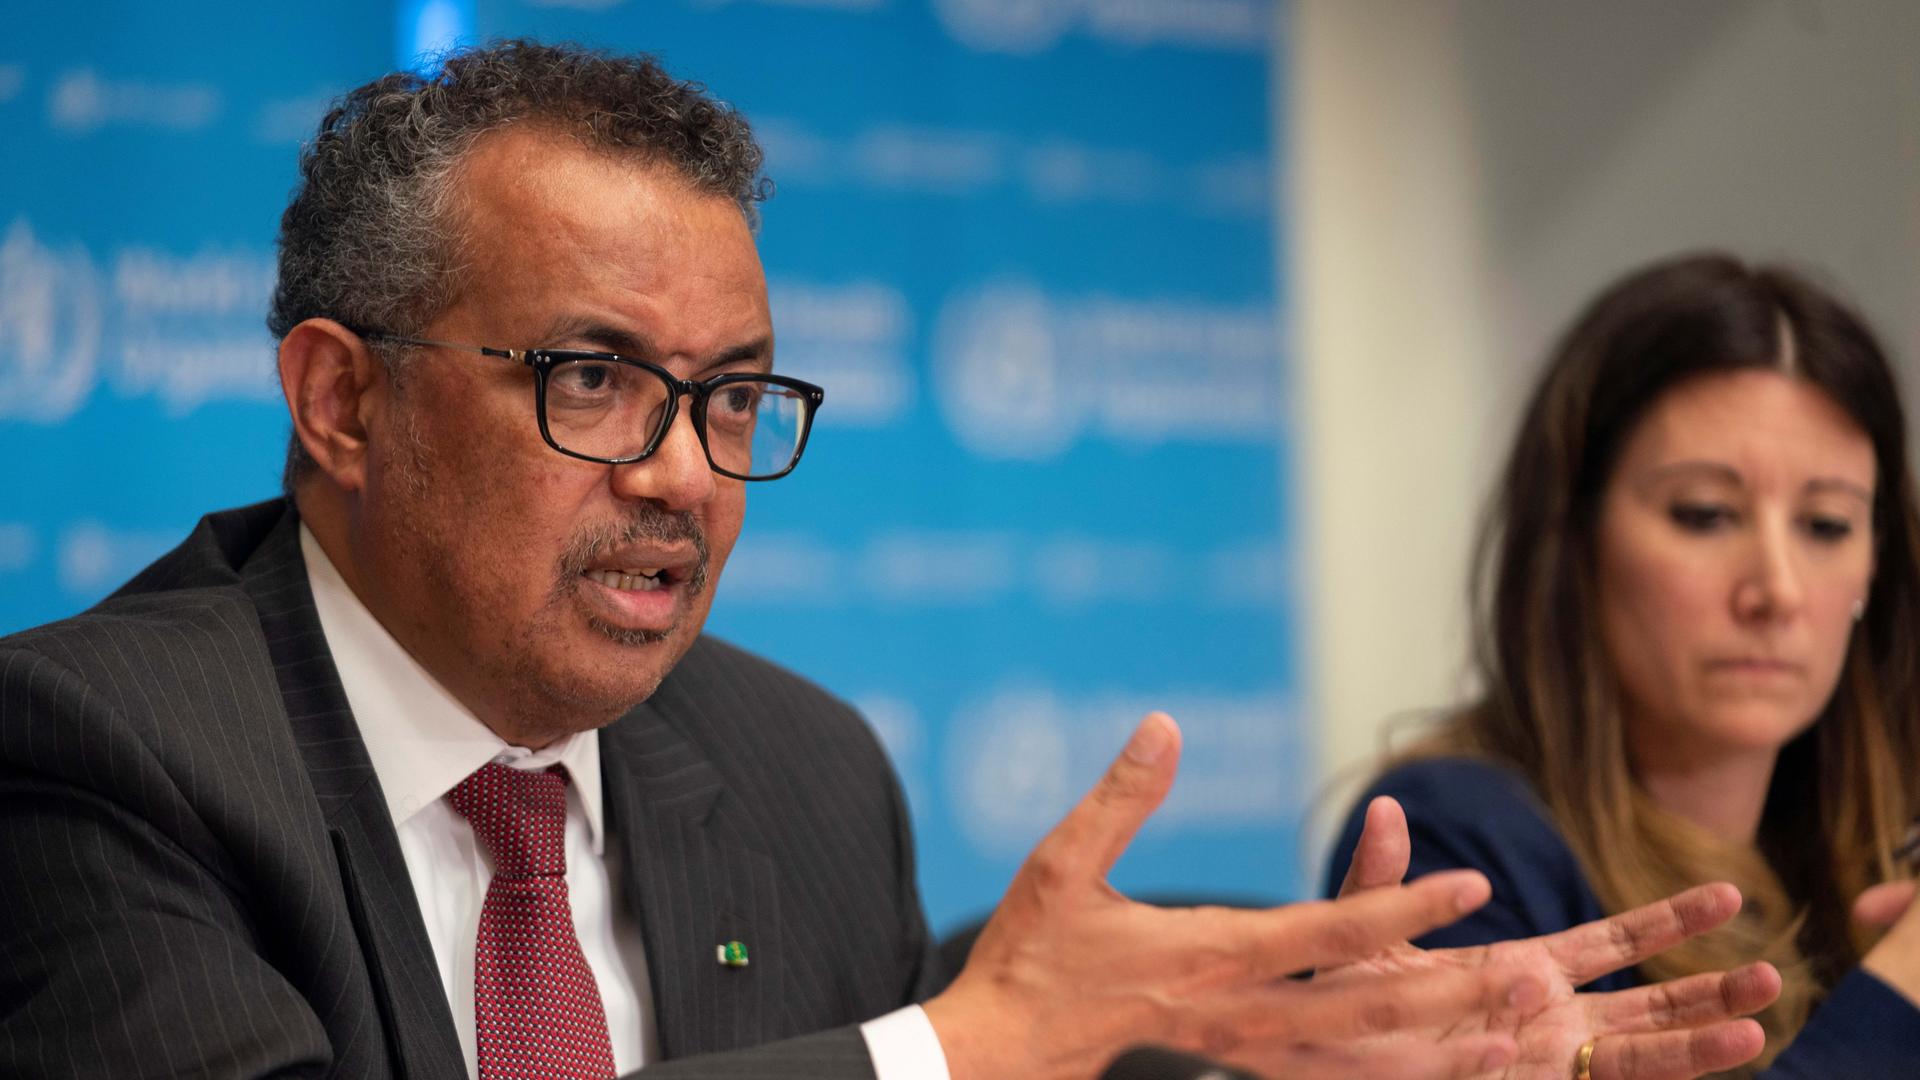 Director-General of World Health Organization (WHO) Tedros Adhanom Ghebreyesus attends a news conference on the outbreak of the coronavirus disease (COVID-19) in Geneva, Switzerland, March 16, 2020. 